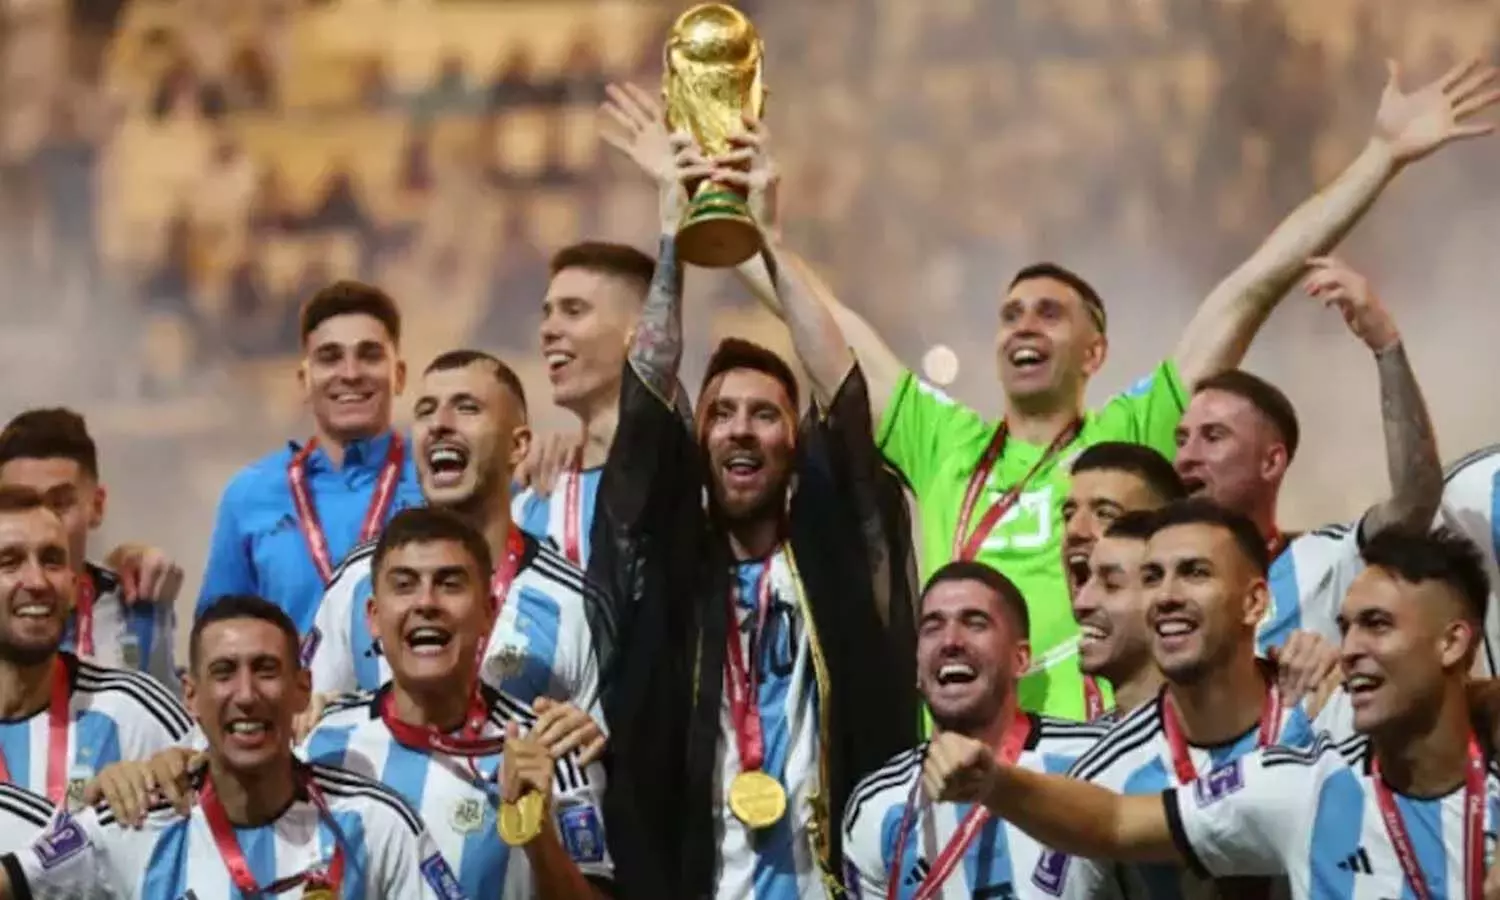 Argentina gets $42 million prize for thrilling victory in Qatar FIFA World Cup